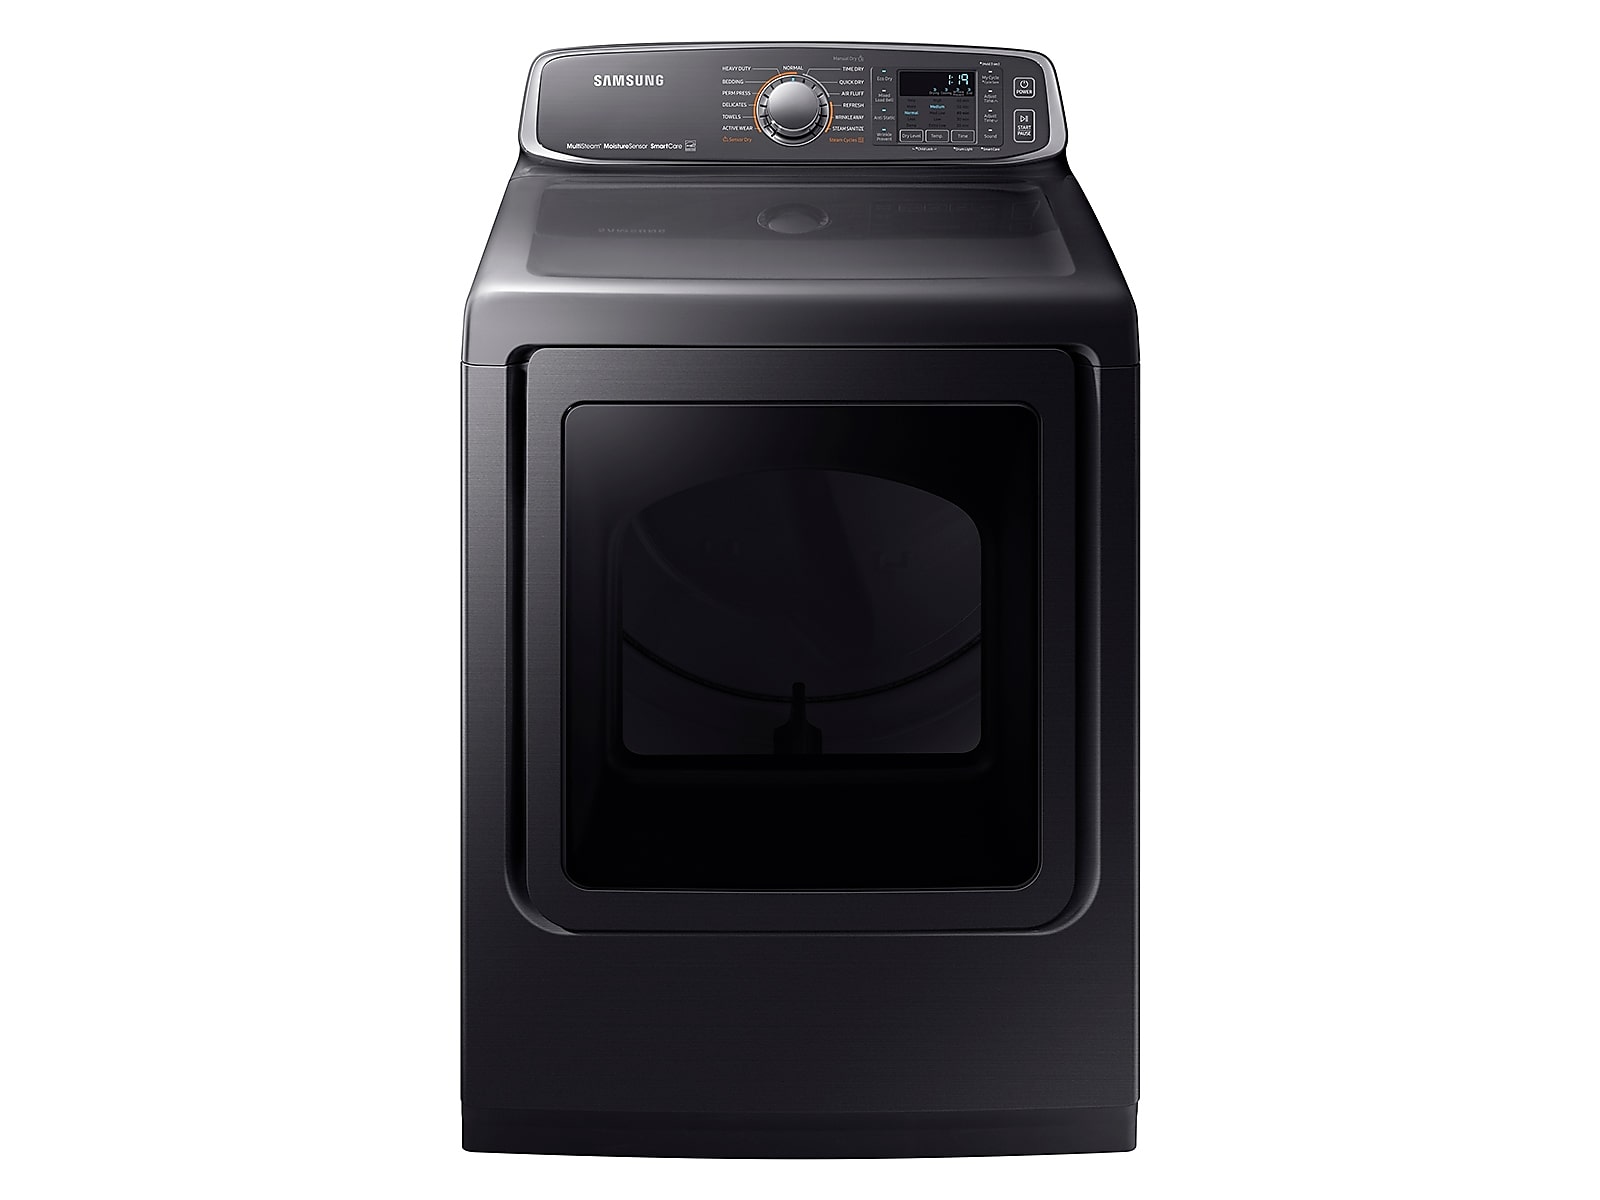 Samsung 7.4 cu. ft. Electric Dryer in Black Stainless Steel(DVE52M7750V/A3) photo